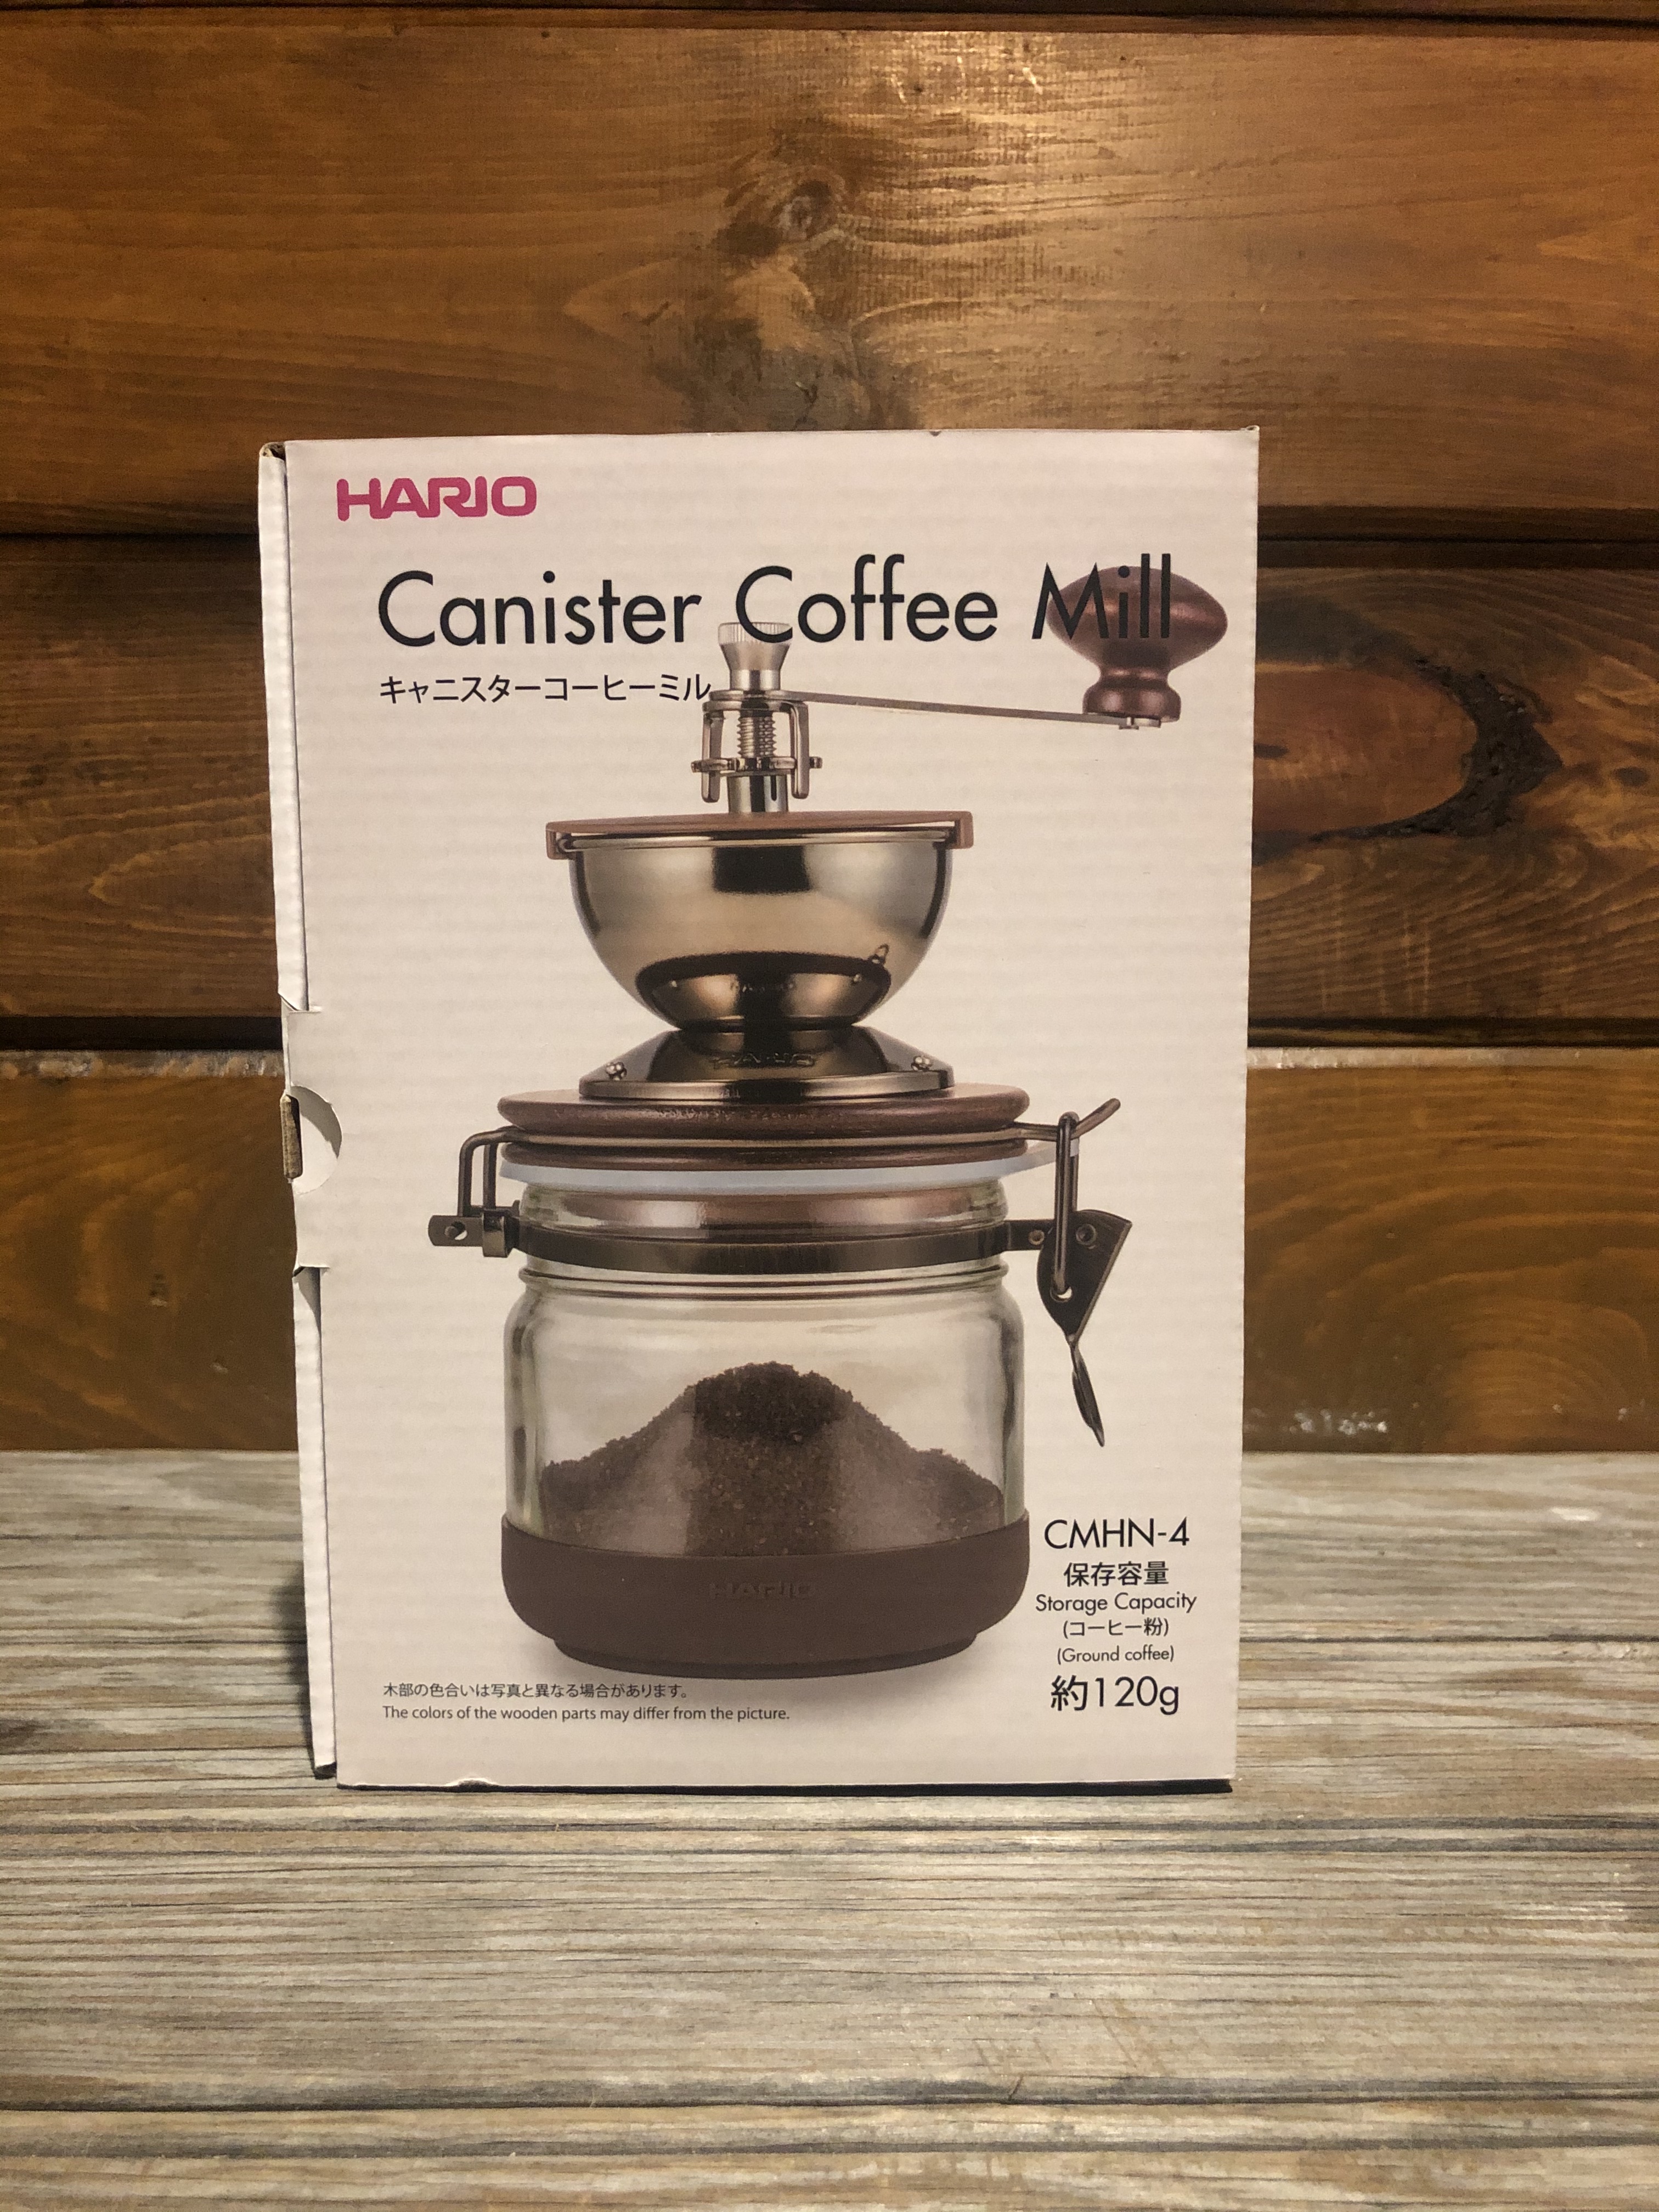 Picture Hario Canister Coffee Mill